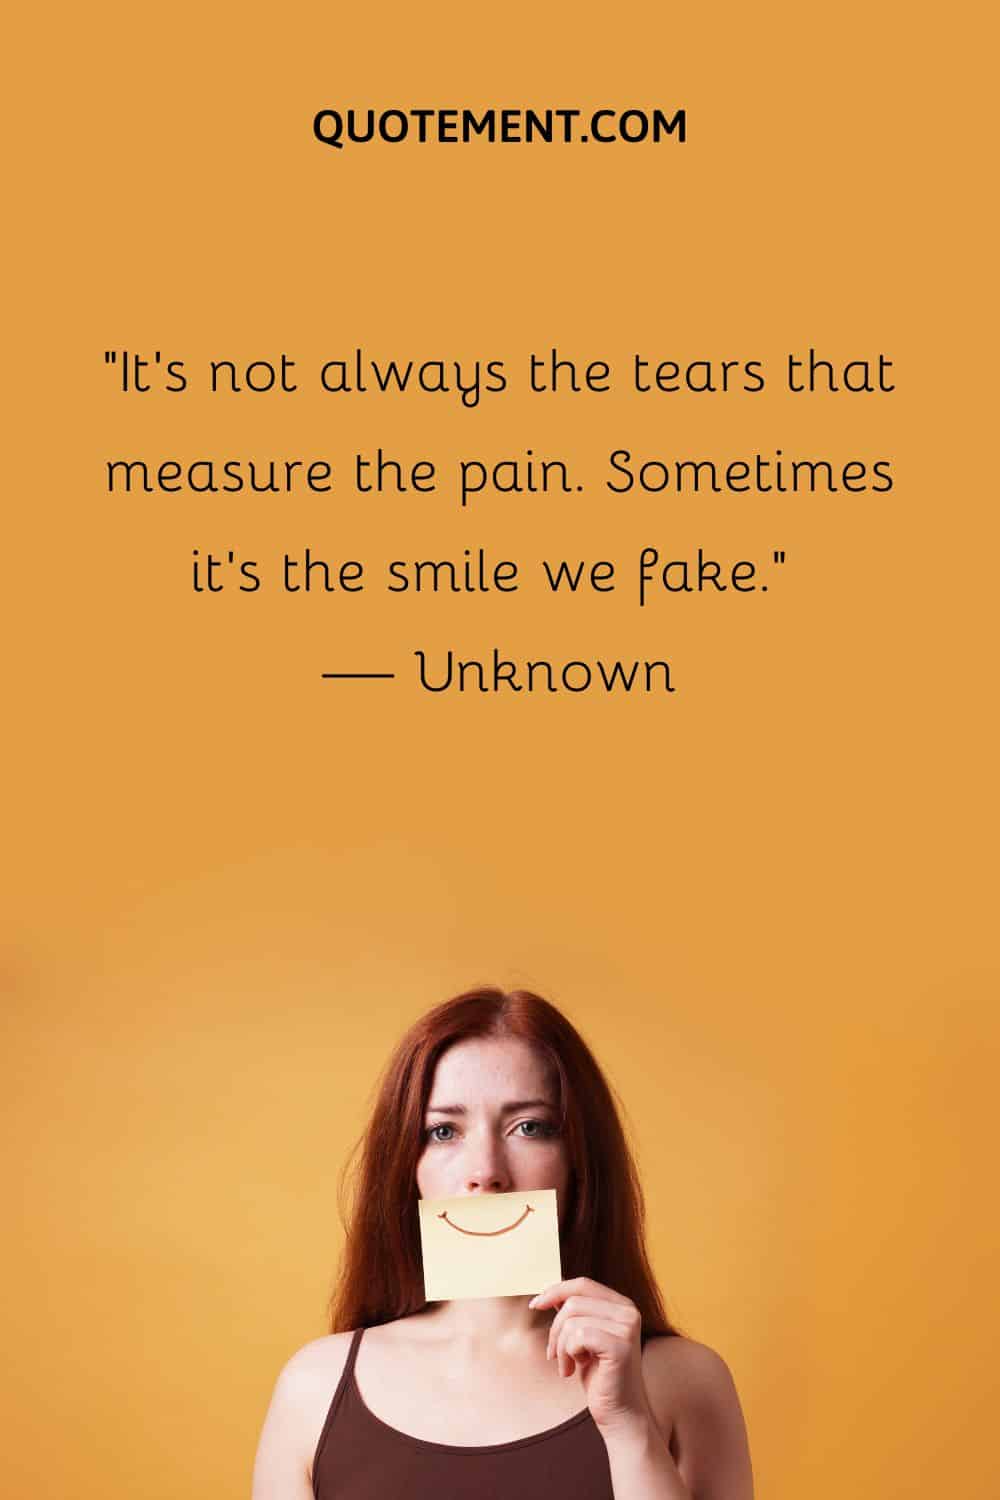 It’s not always the tears that measure the pain